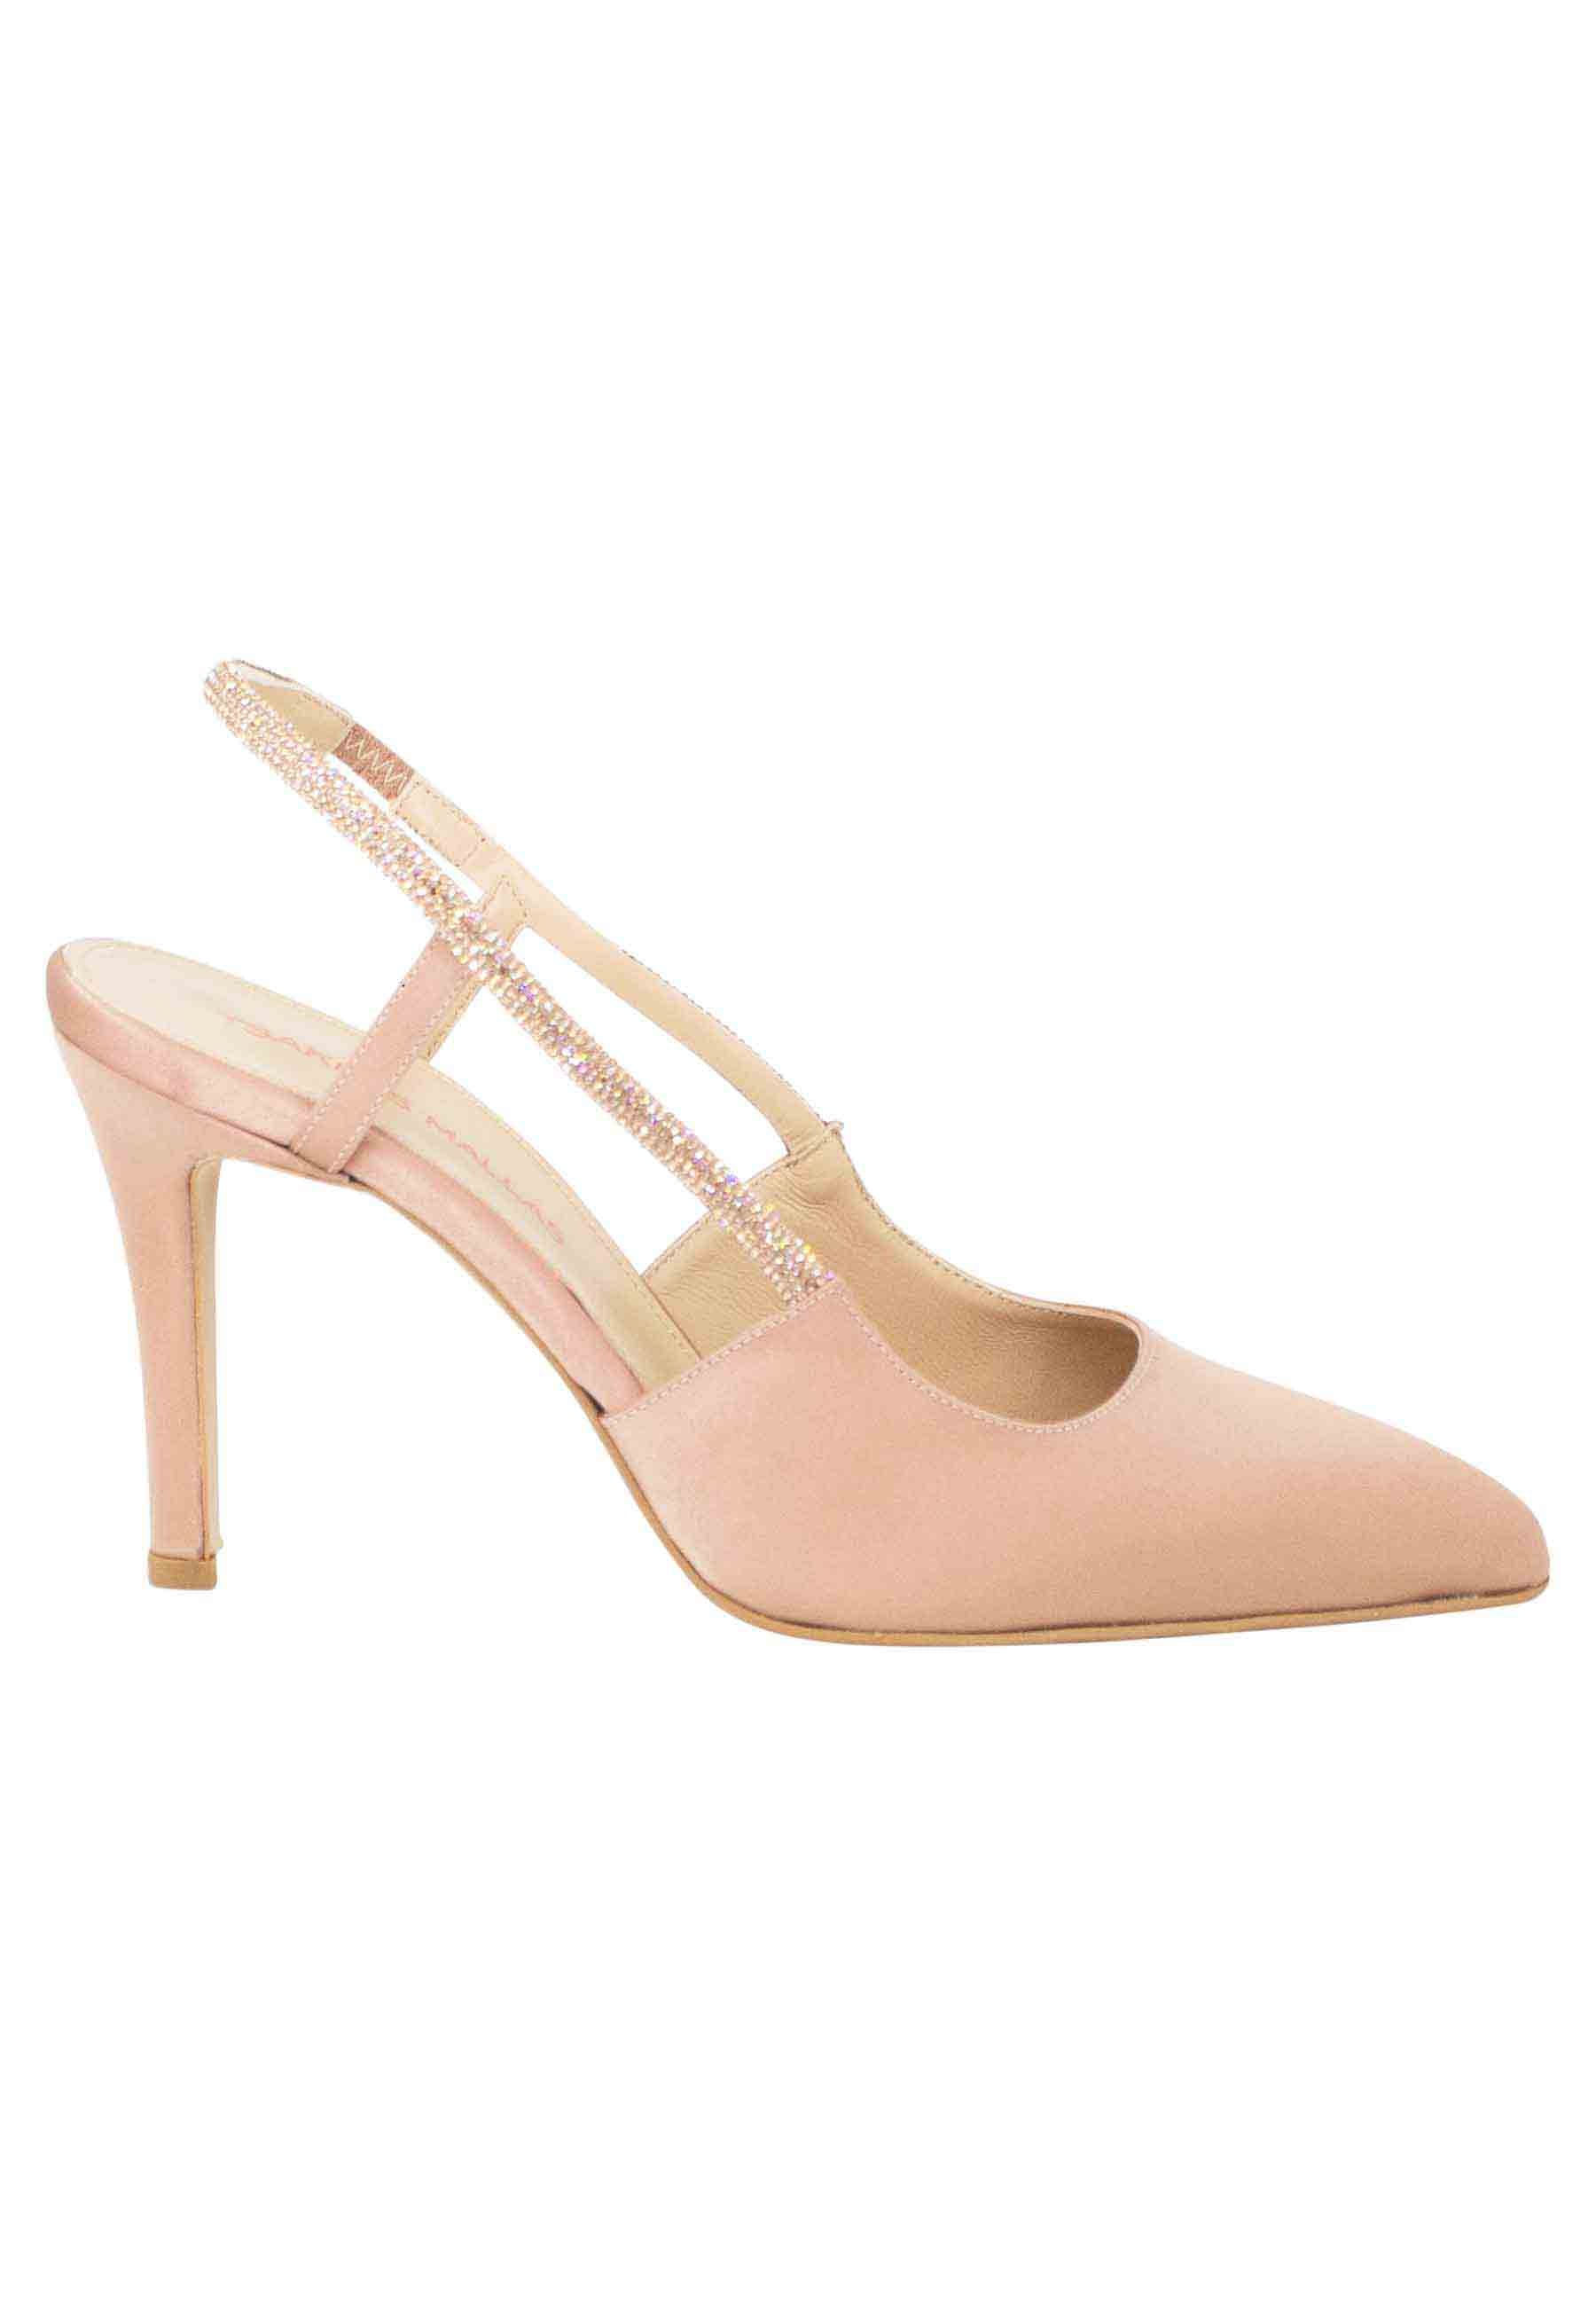 Women's slingback pumps in powder pink fabric with rhinestone strap